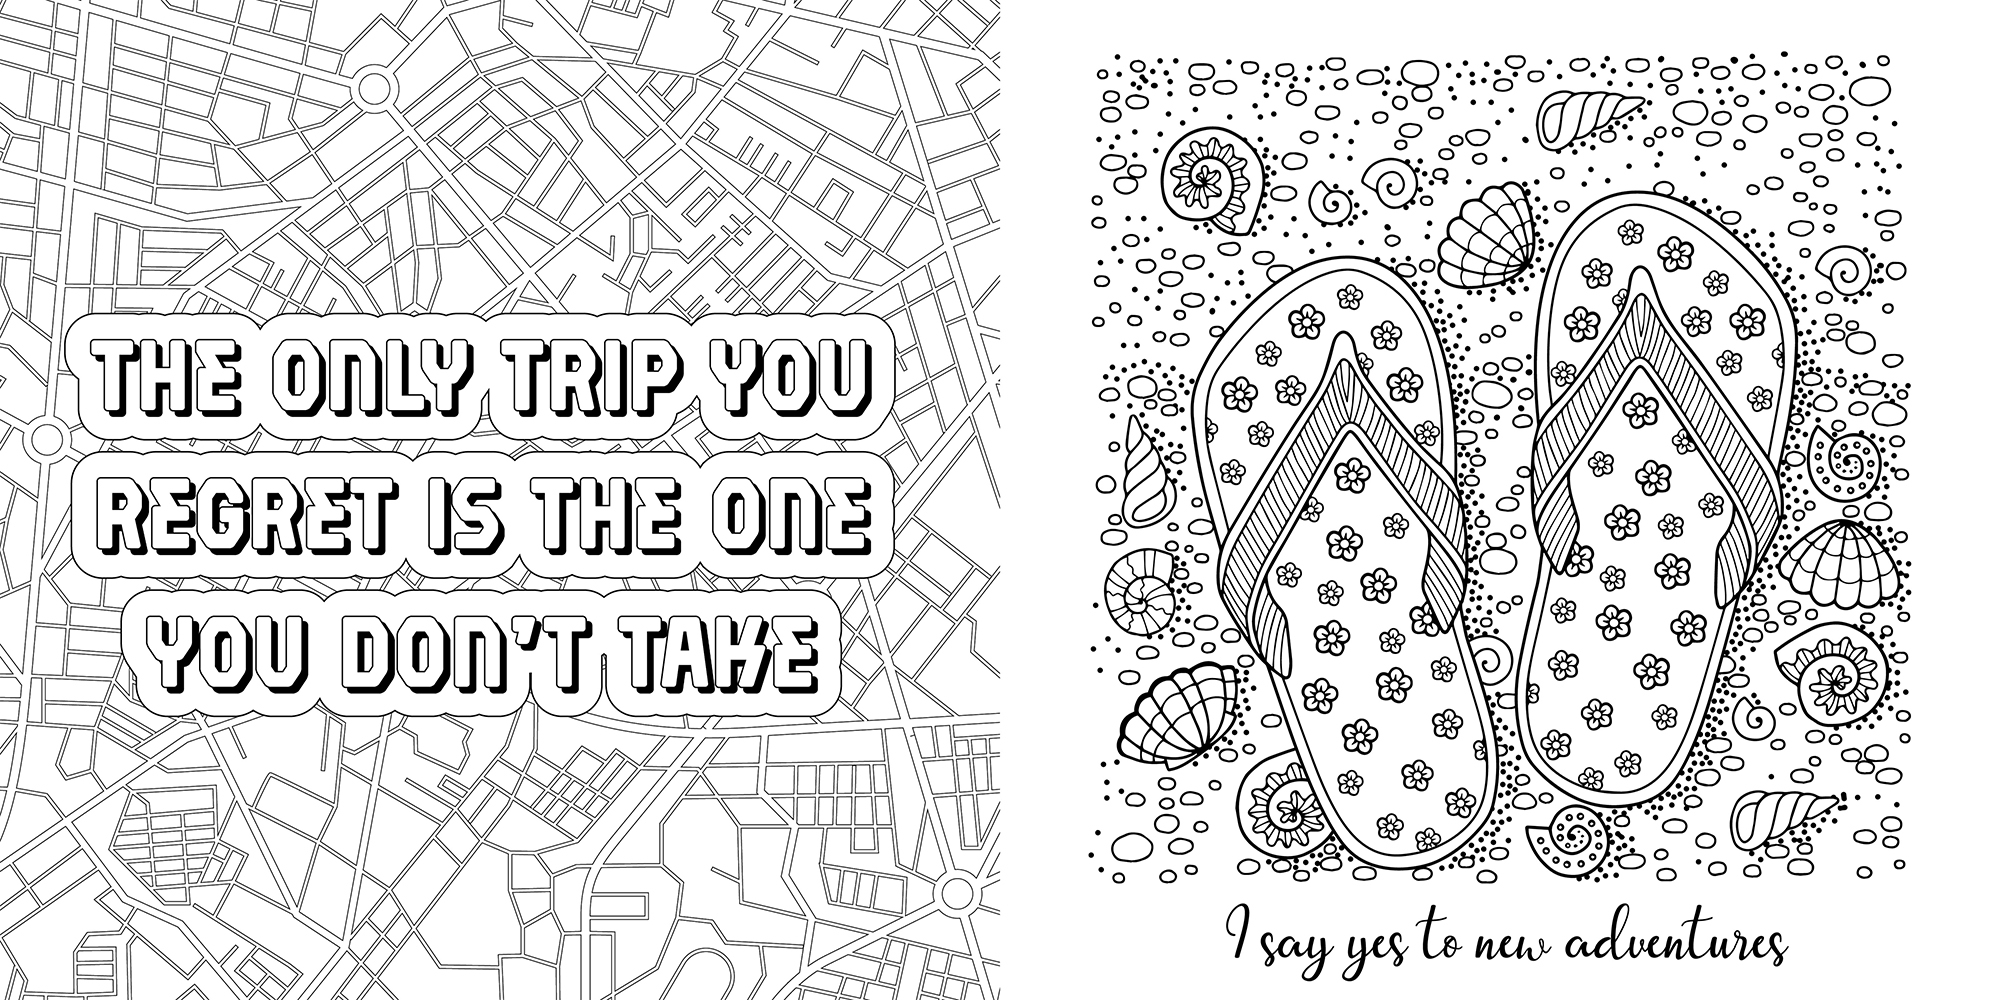 The One and Only Colouring Book for Travelling Adults: A Review